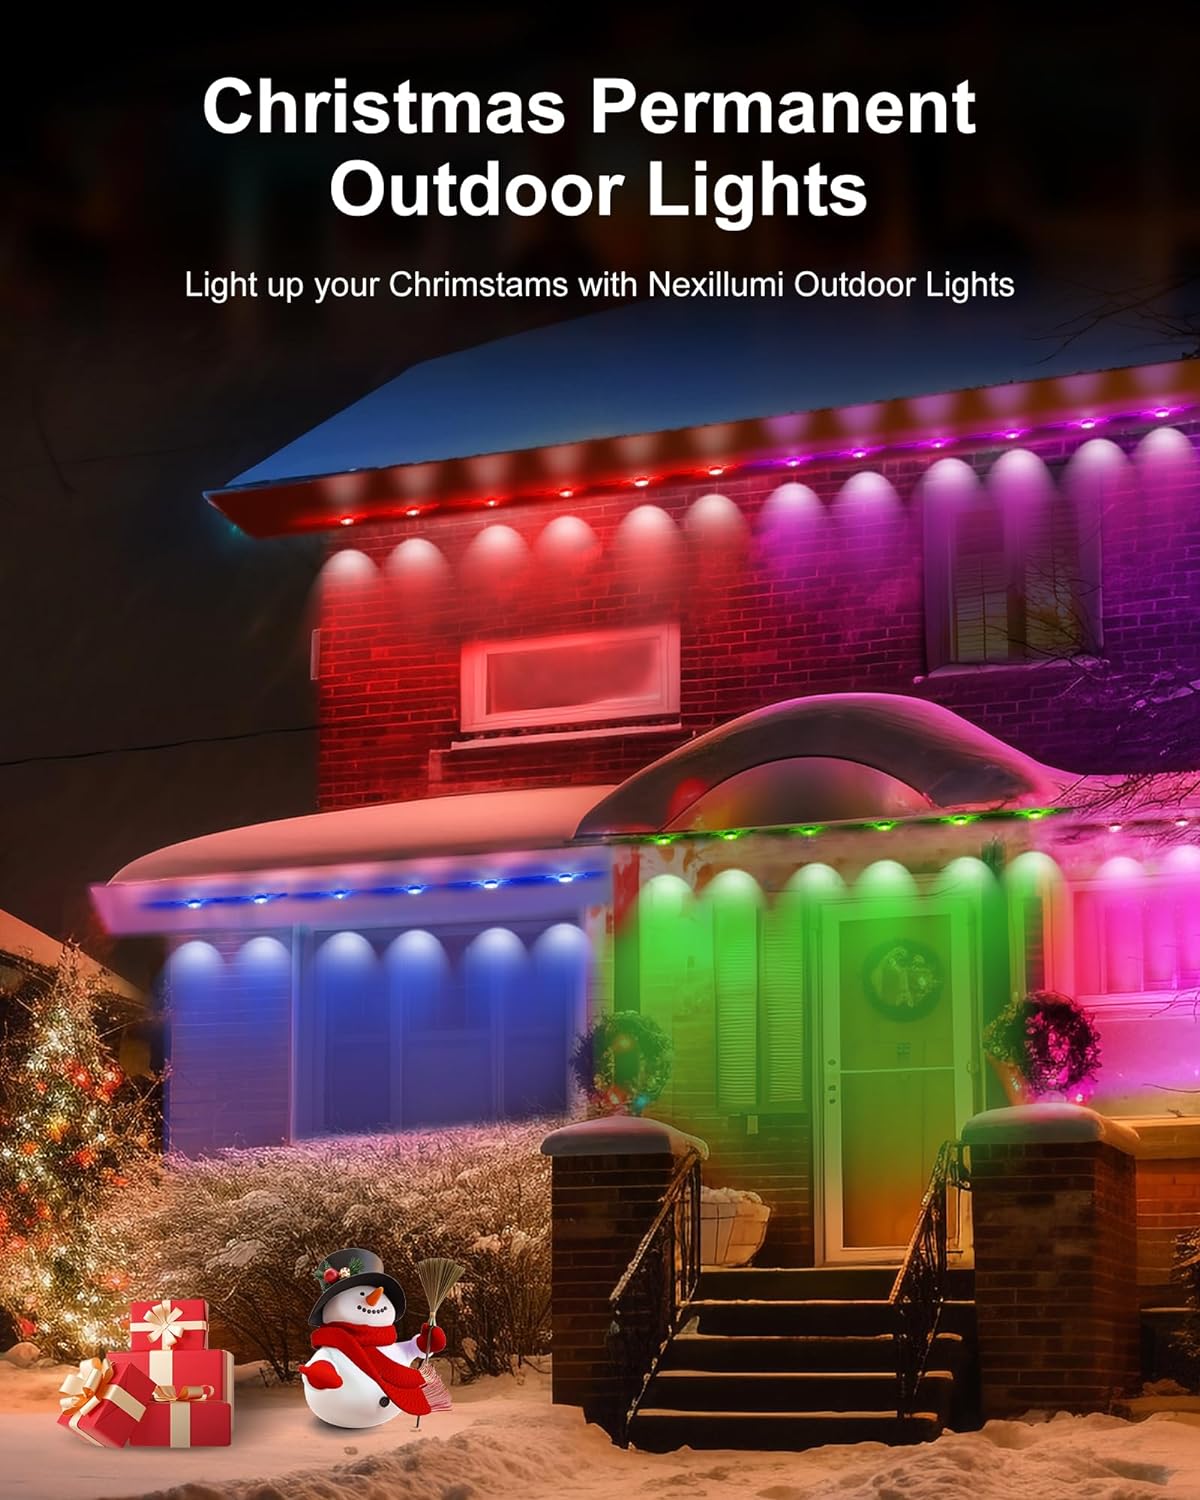 Permanent Outdoor Lights for House, 100ft Smart RGBIC Outside Lights with 72 Scene Modes, IP67 Waterproof Eaves Lights for Christmas All Holiday Decorations, Work with Alexa, Google Assistant (